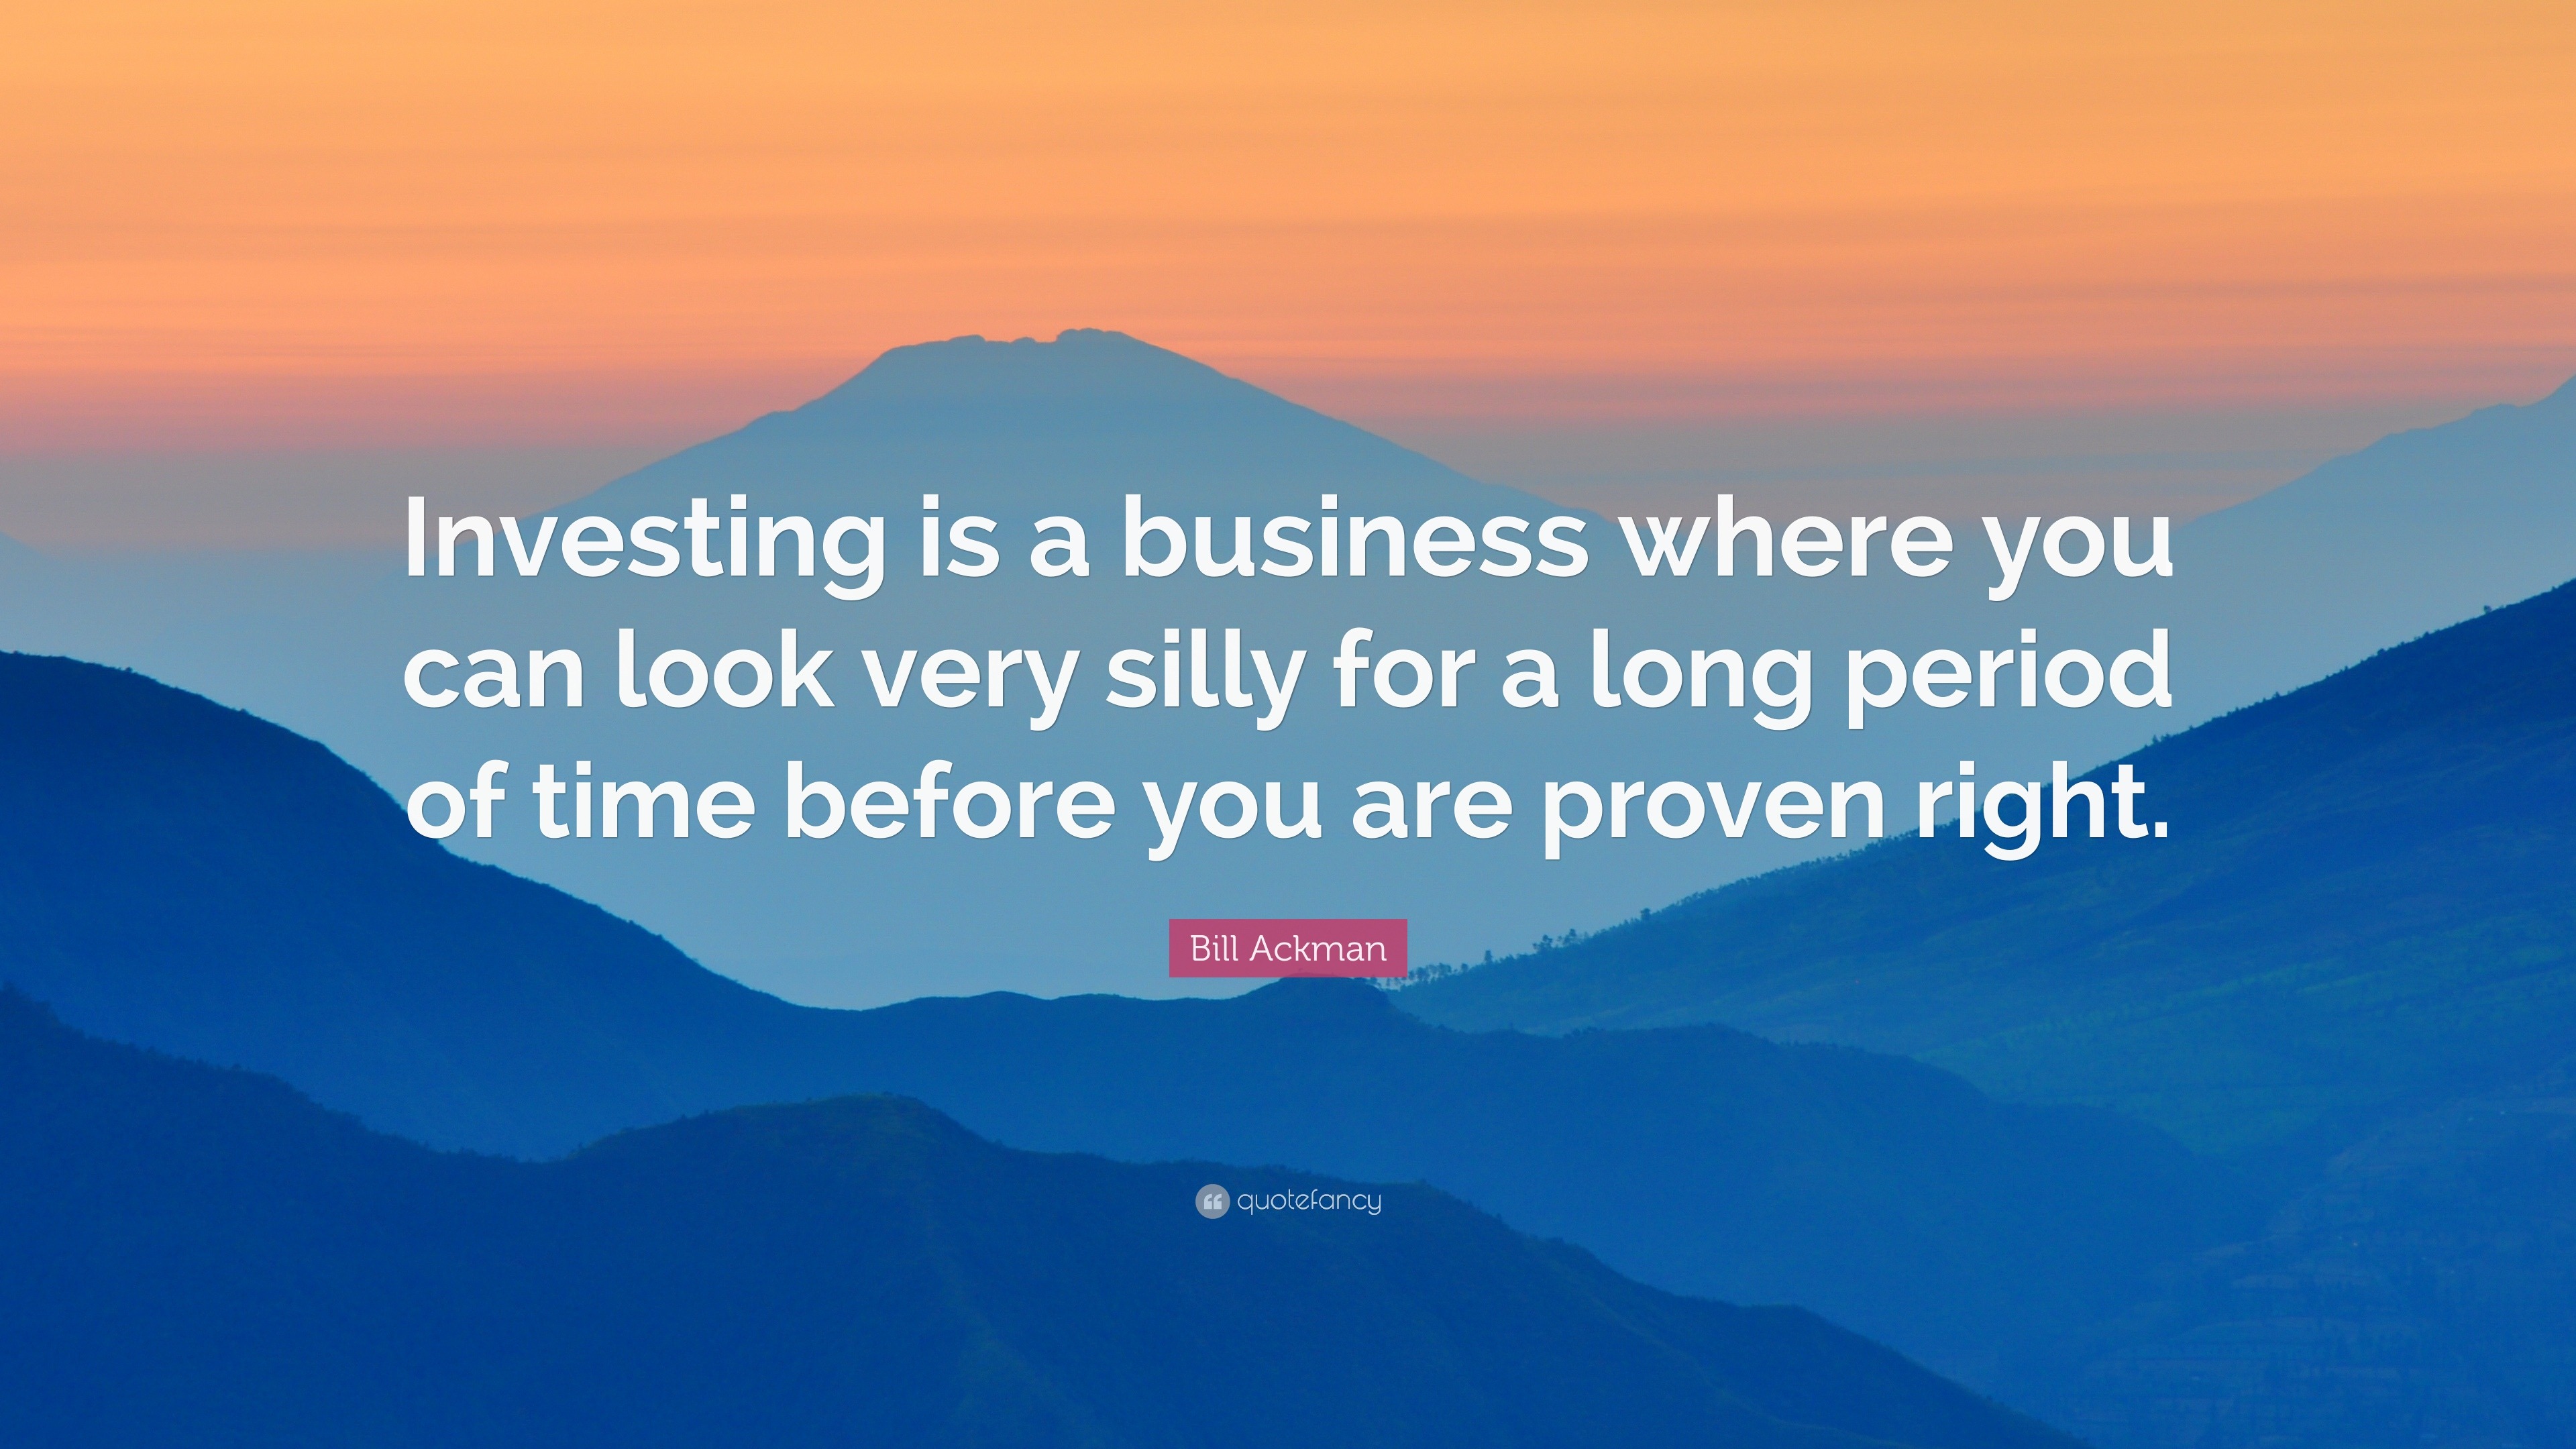 Bill Ackman Quote “Investing is a business where you can look very